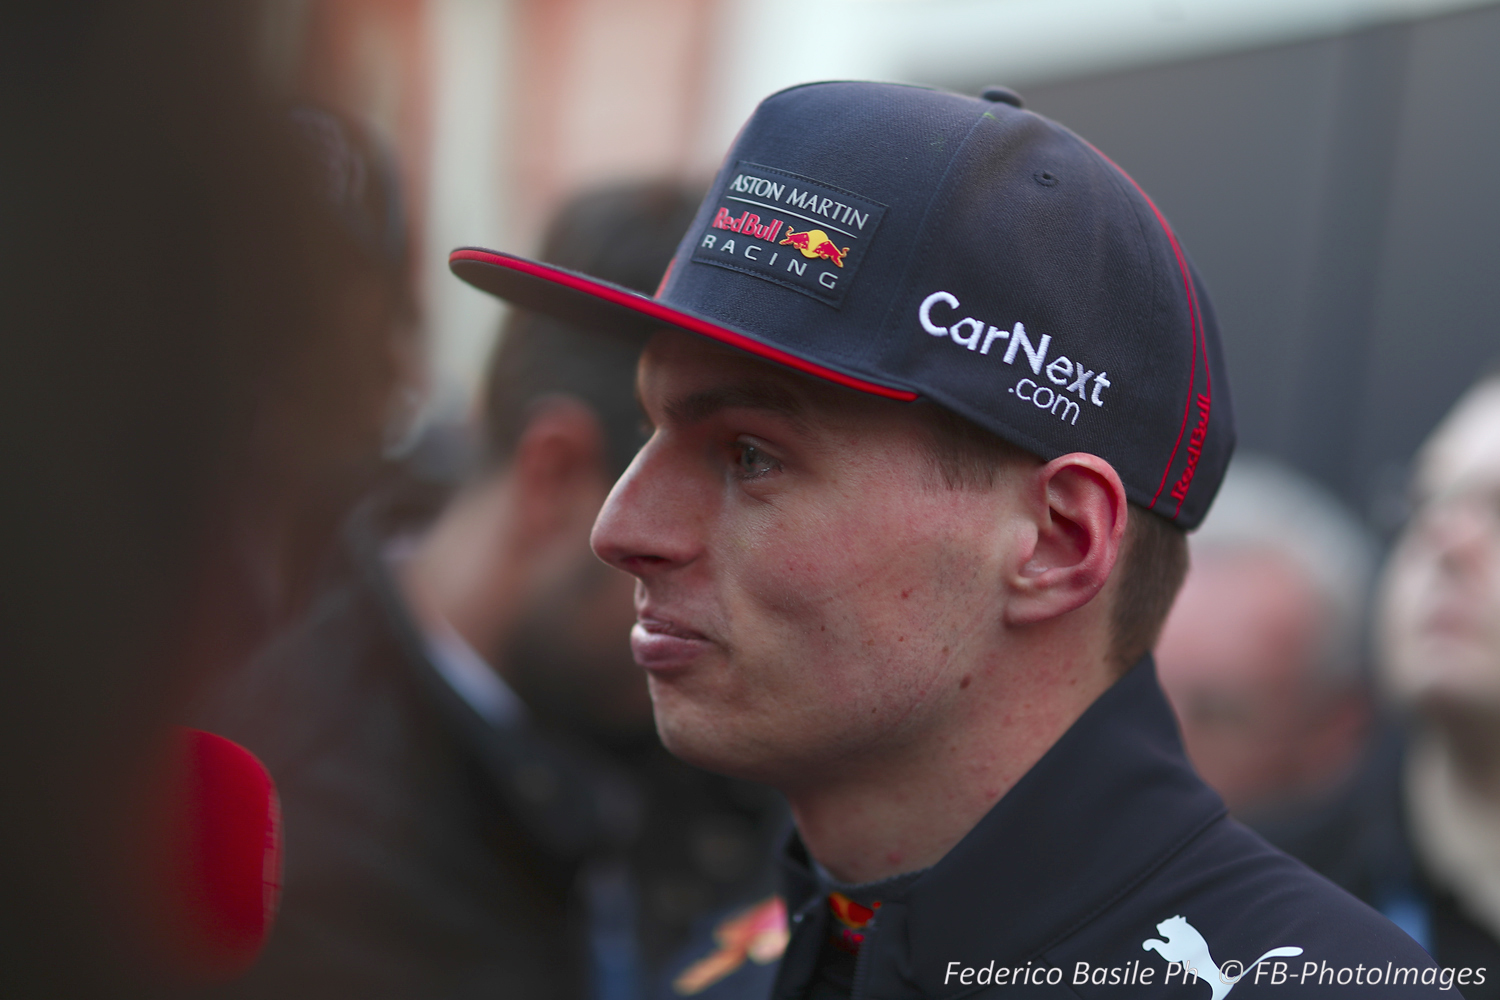 How does Max think the Ferrari drivers feel at Monza?